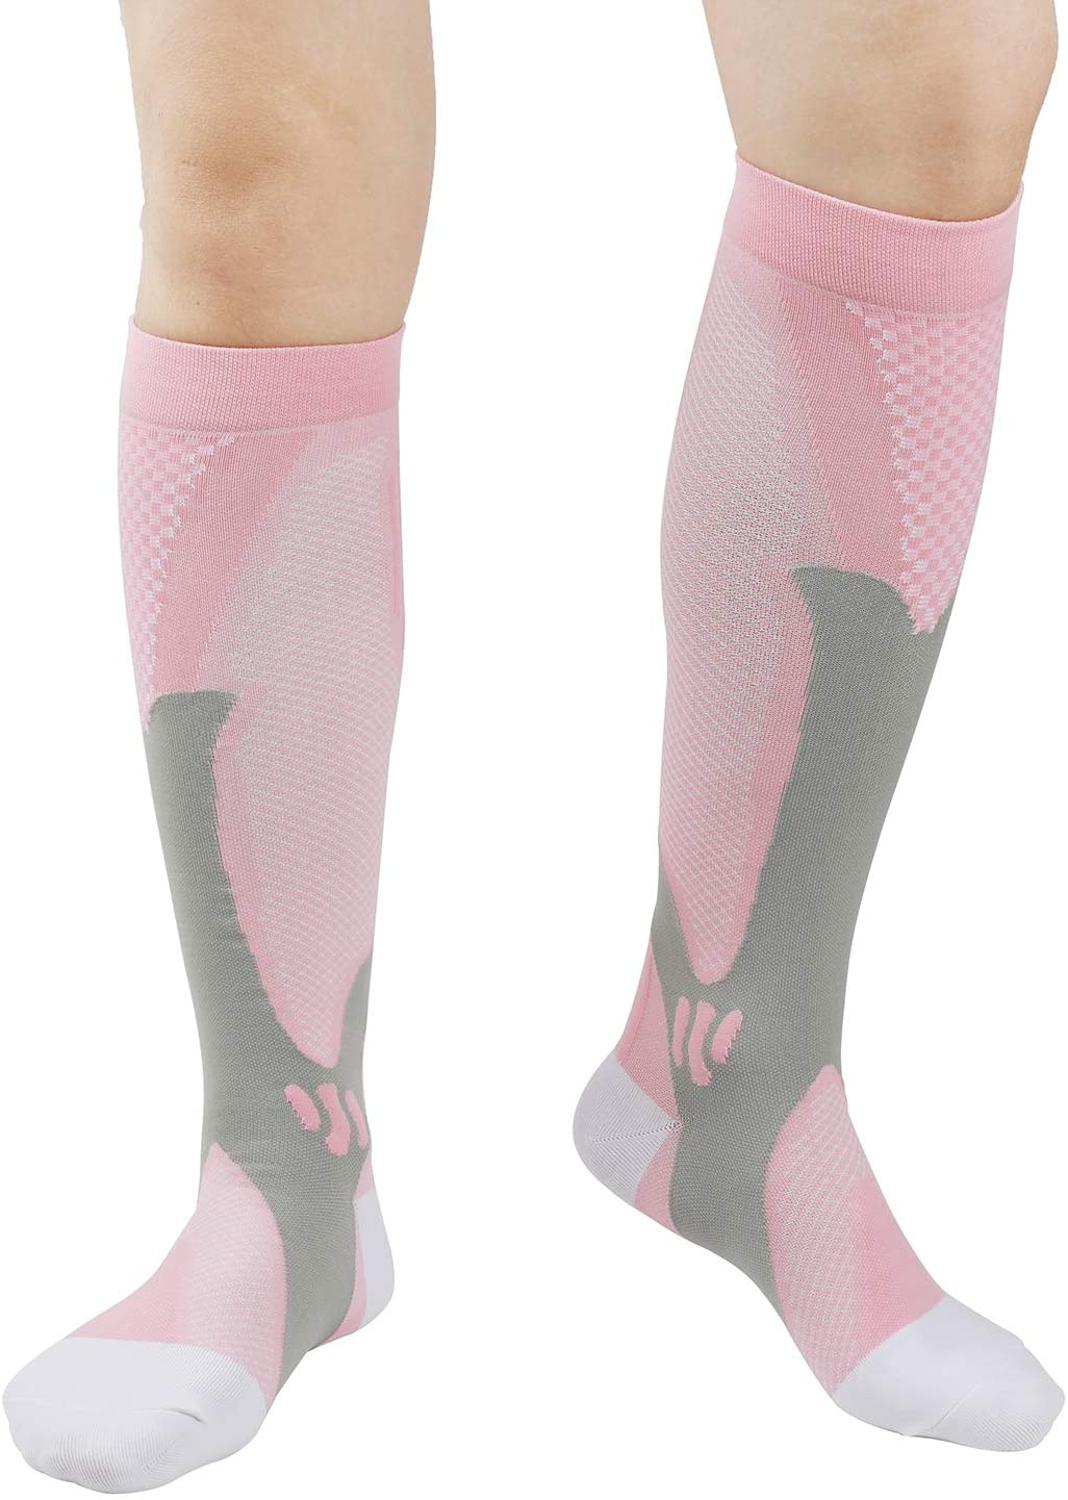 Compression Stocking Anti-slip Best for Basketball Football